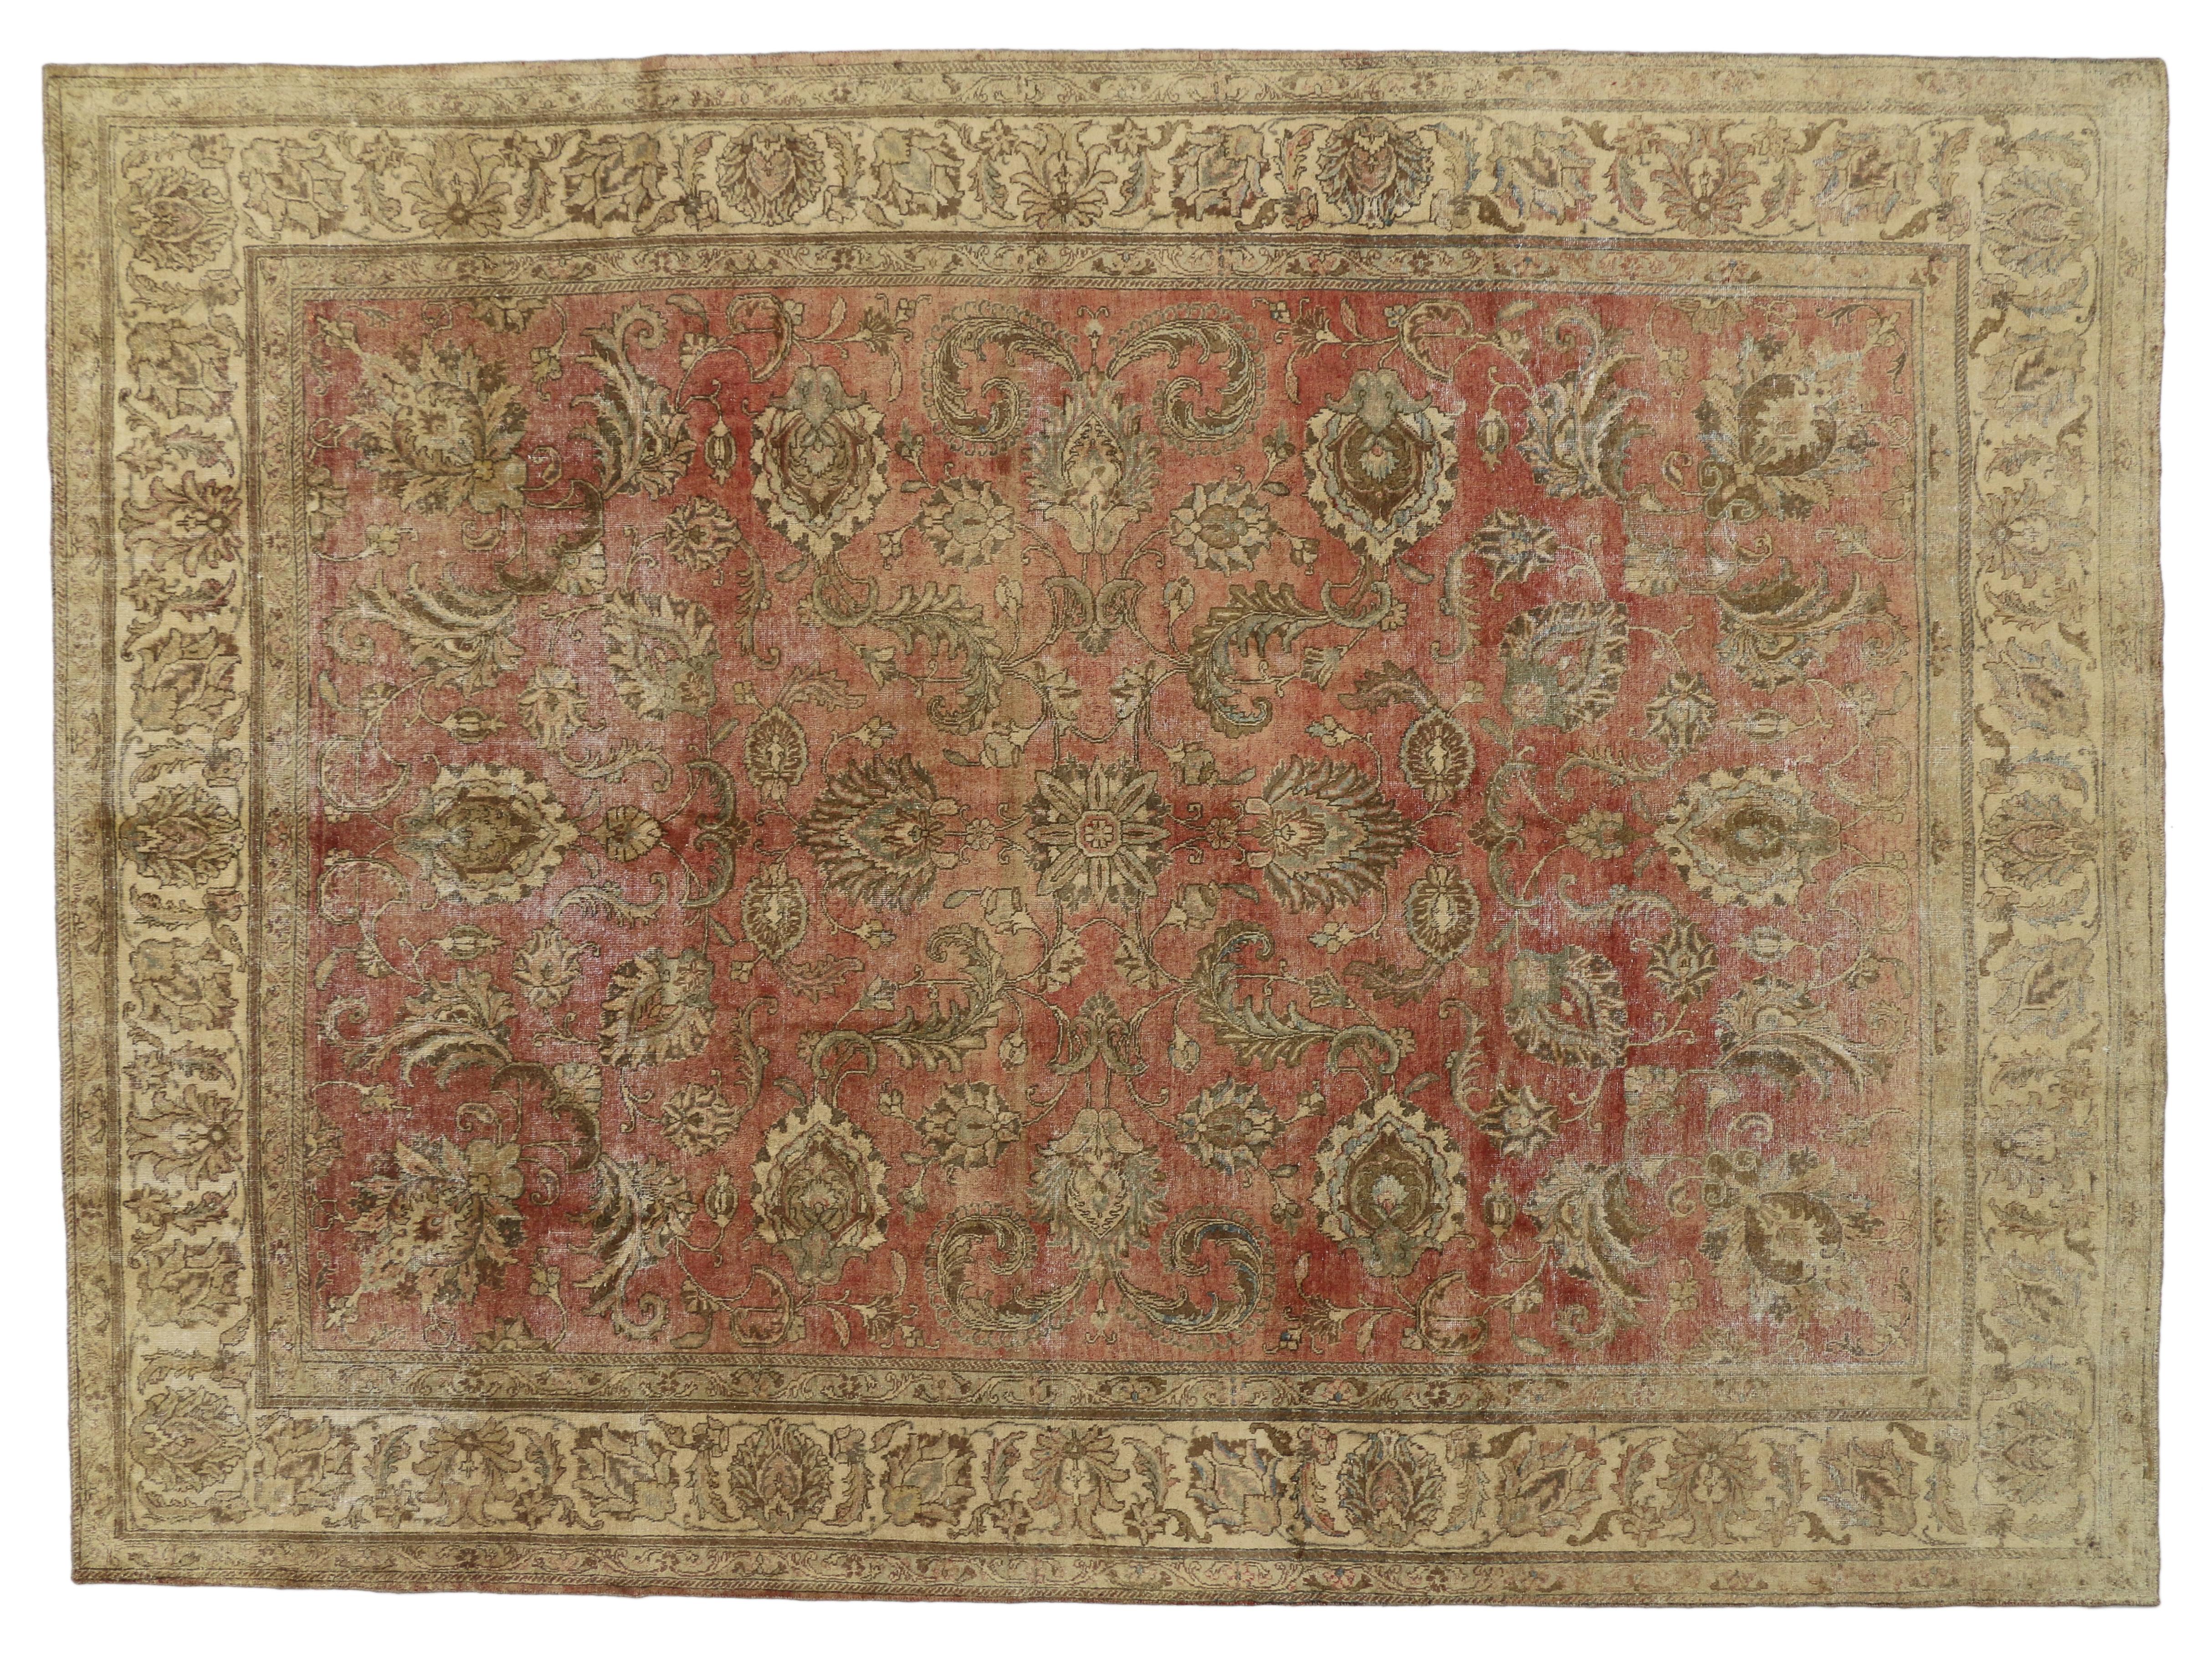 20th Century Distressed Vintage Tabriz Persian Rug with Rustic Style